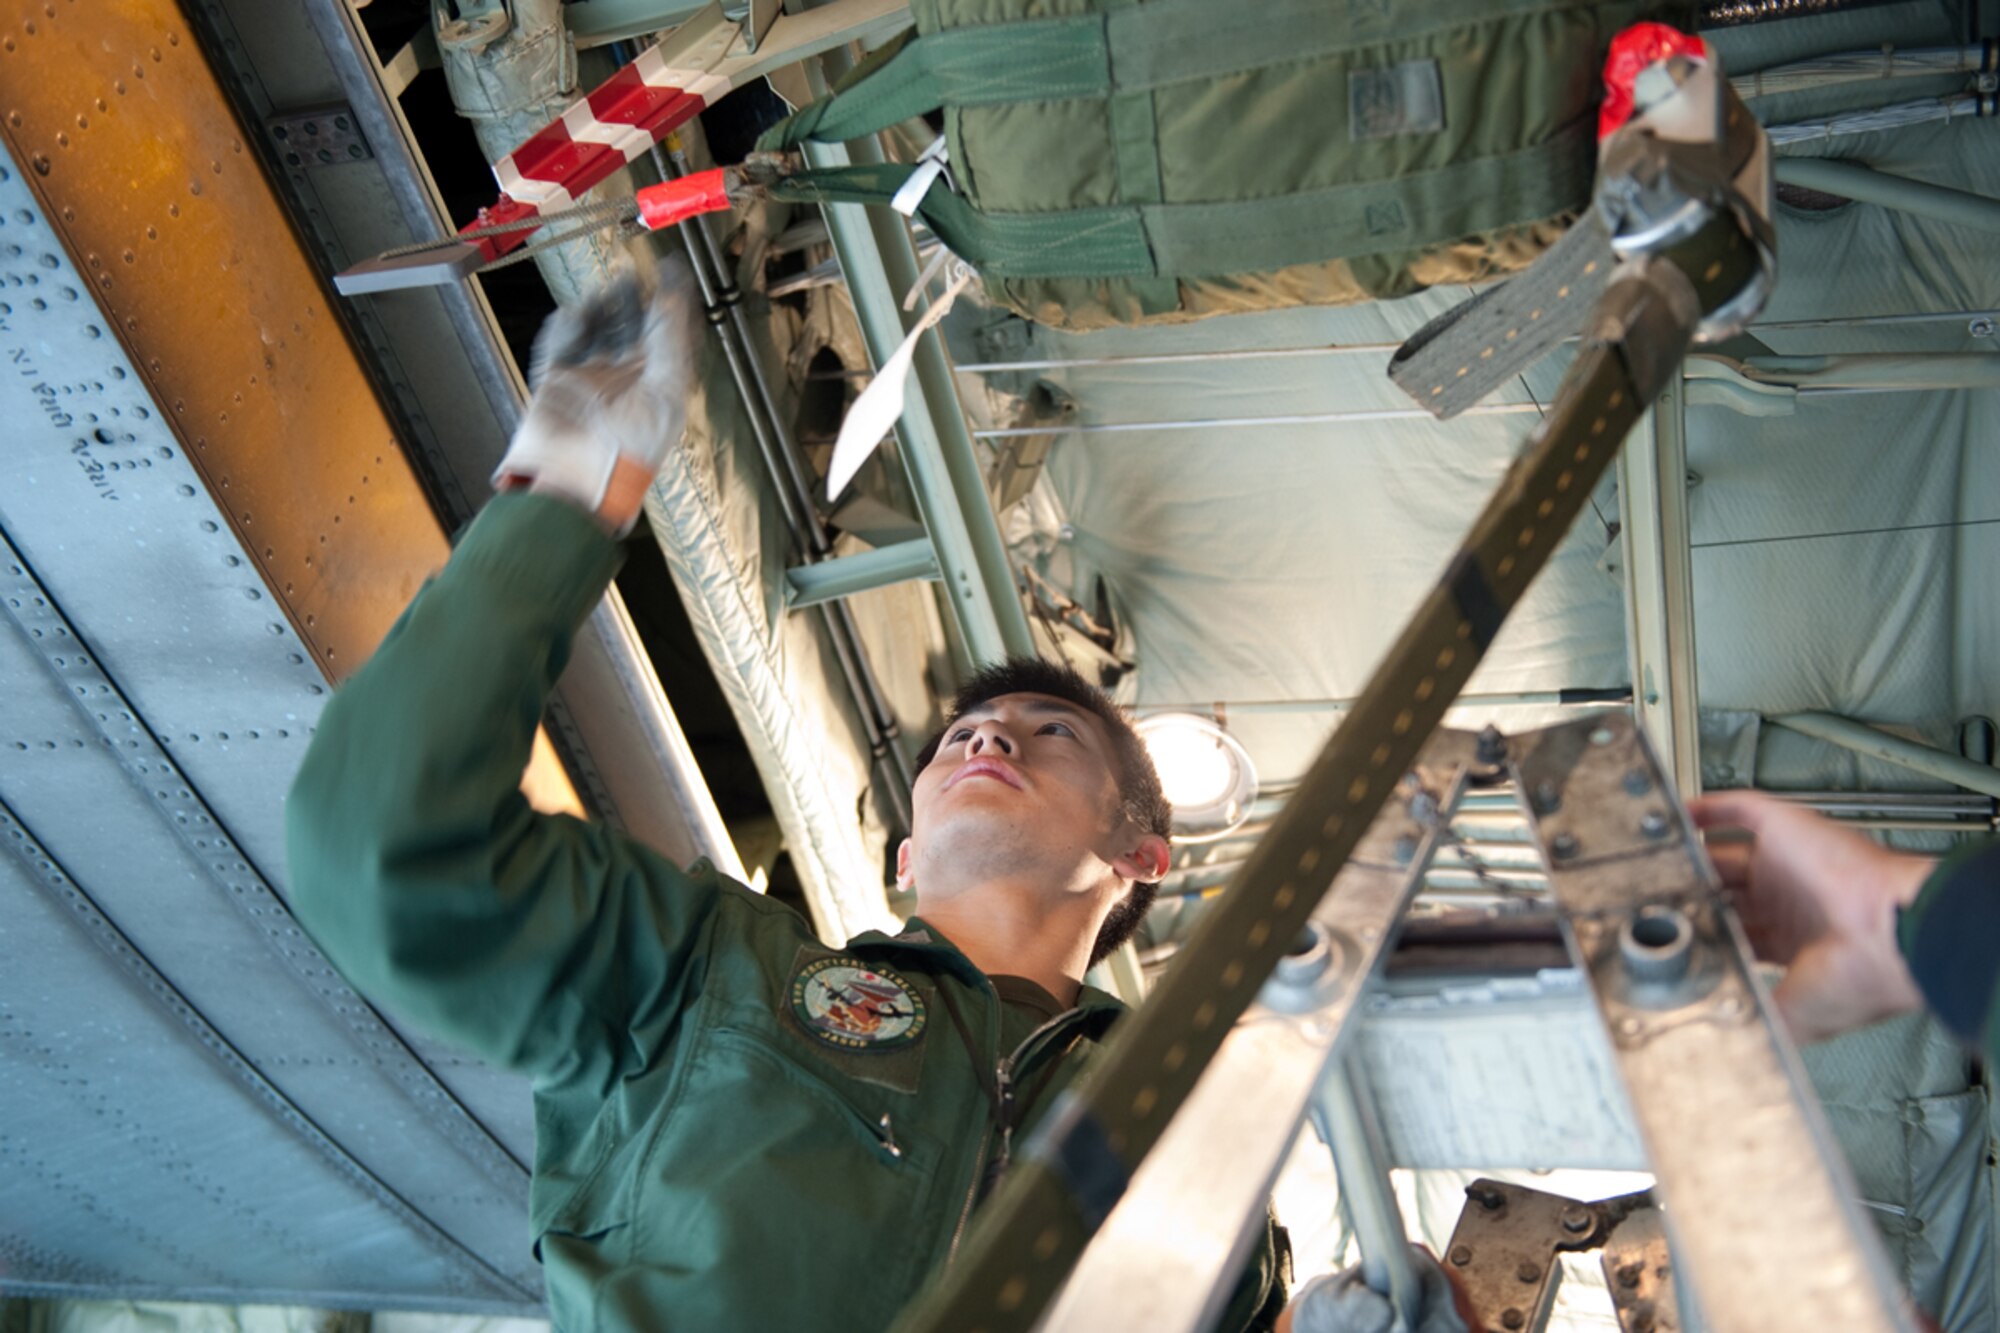 Japanese Air Self Defense Force Staff Sgt.Toshiyuki Sugimoto checks the air drop system during pre-flight inspections for the Japanese C-130 Hercules during Red Flag - Alaska on the flight line of Joint Base Elmendorf-Richardson, Alaska June 19. The C-130 Hercules offers a maximum speed of 600 kilometers an hour with a payload of 19,400 pounds and can be used for air drops. Red-Flag Alaska is designed to strengthen bilateral ties between nations and offers the JASDF the opportunity to improve aerial tactics. (U.S. Air Force photo/Staff Sgt. Robert Barnett)